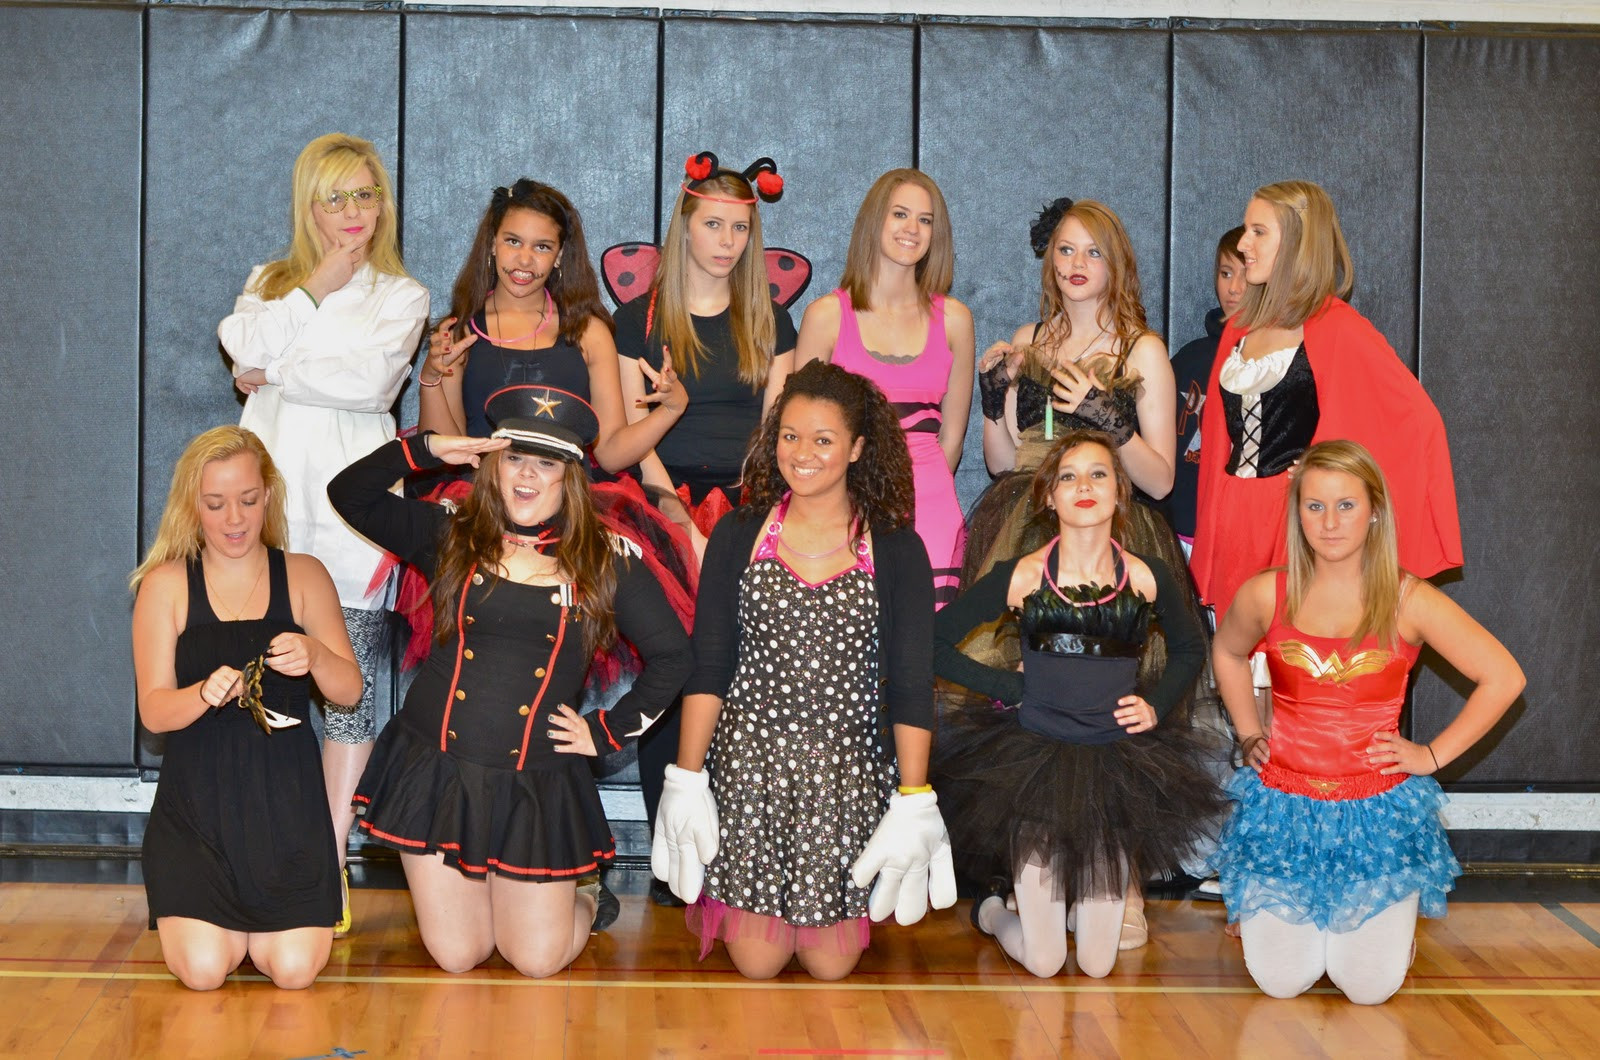 Middle School Halloween Party Ideas
 PIRATE CREW DANCE TEAM Halloween Middle School Dance at